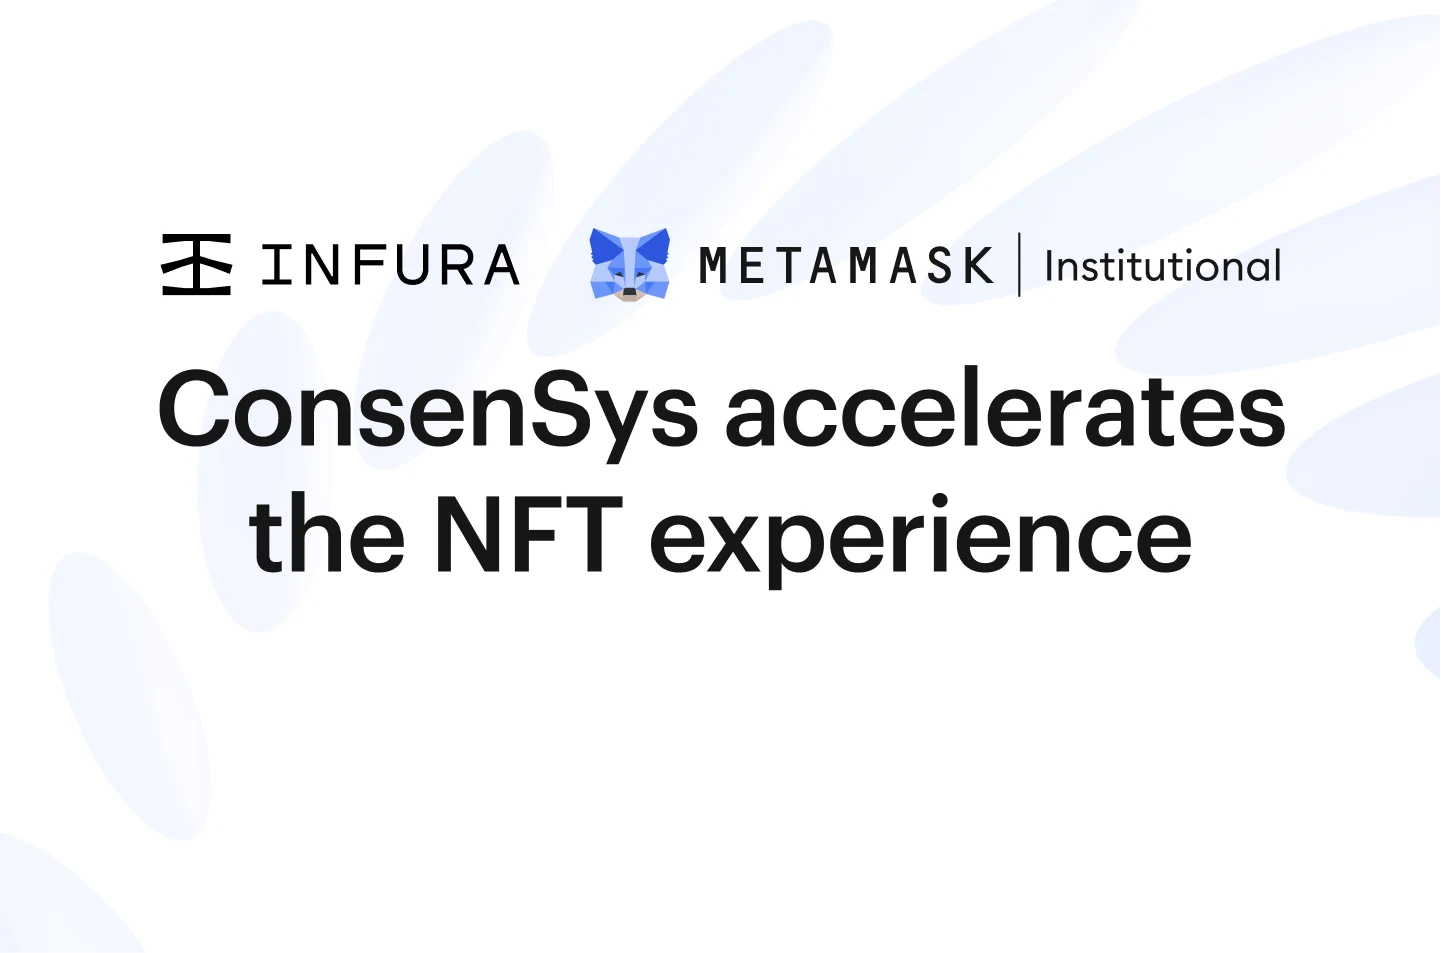 Image: ConsenSys accelerates the NFT experience by launching Infura NFT API and MetaMask Institutional NFT Portfolio View for developers and organizations